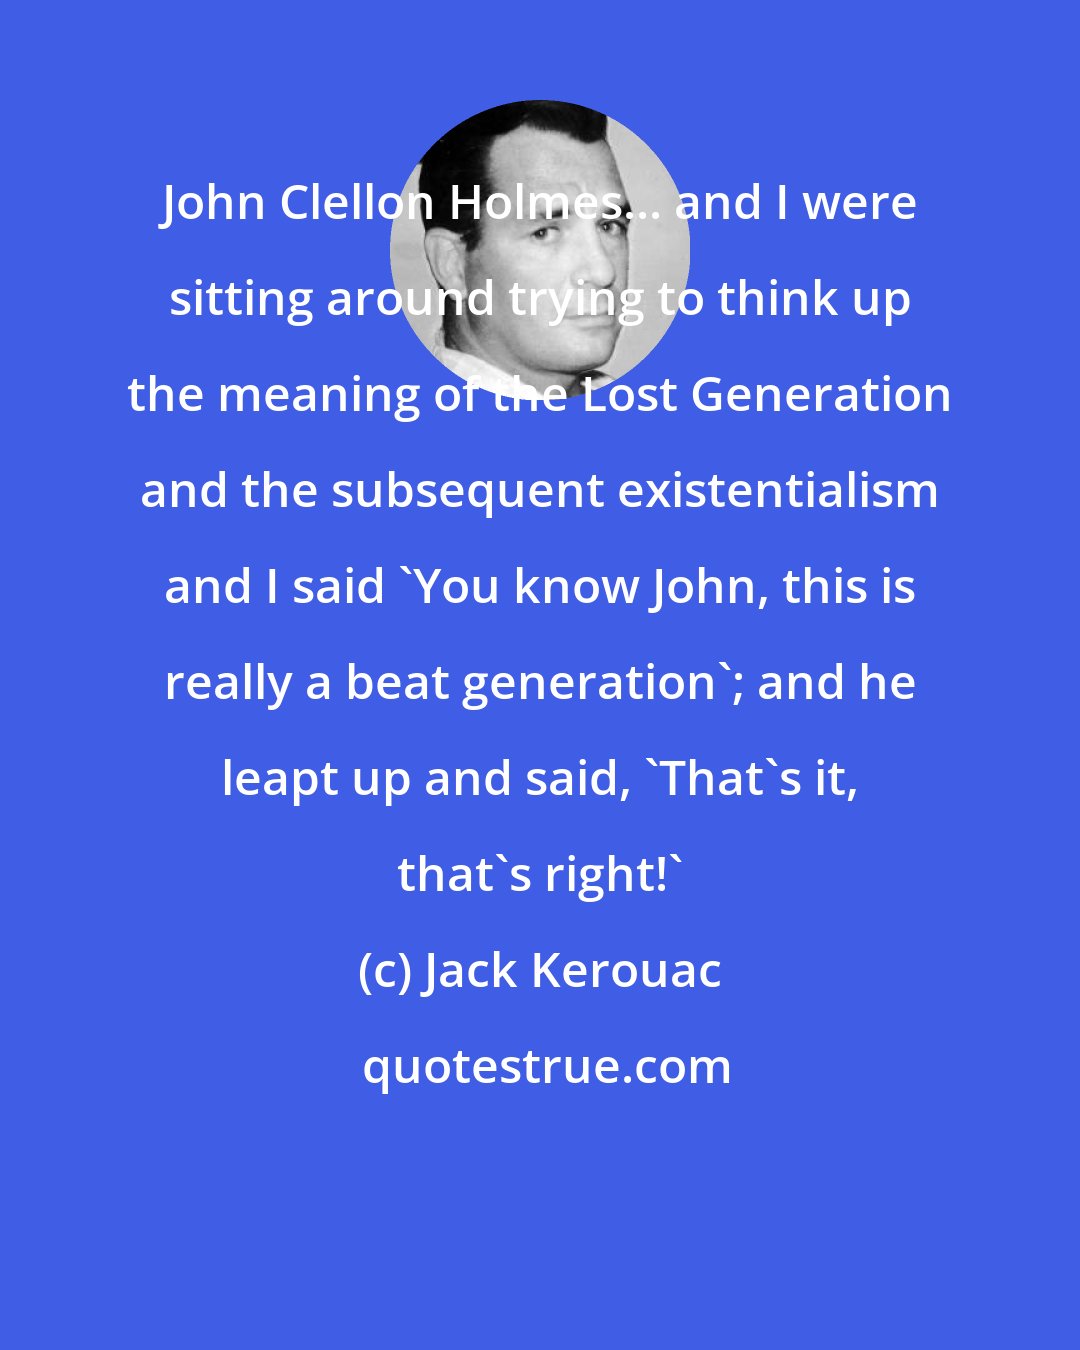 Jack Kerouac: John Clellon Holmes... and I were sitting around trying to think up the meaning of the Lost Generation and the subsequent existentialism and I said 'You know John, this is really a beat generation'; and he leapt up and said, 'That's it, that's right!'